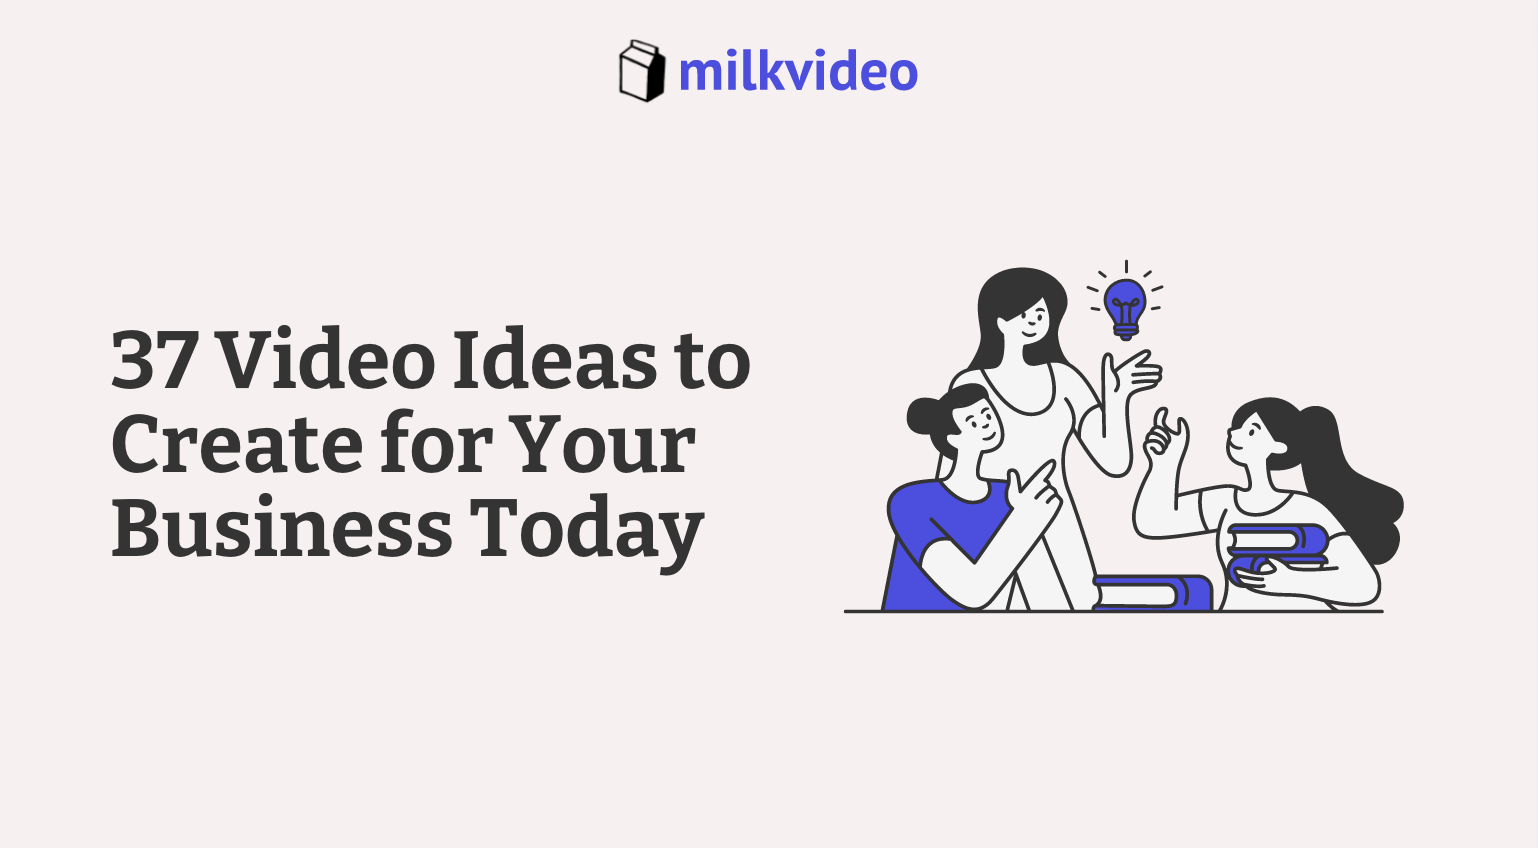 37 Video Ideas to Create for Your Business Today